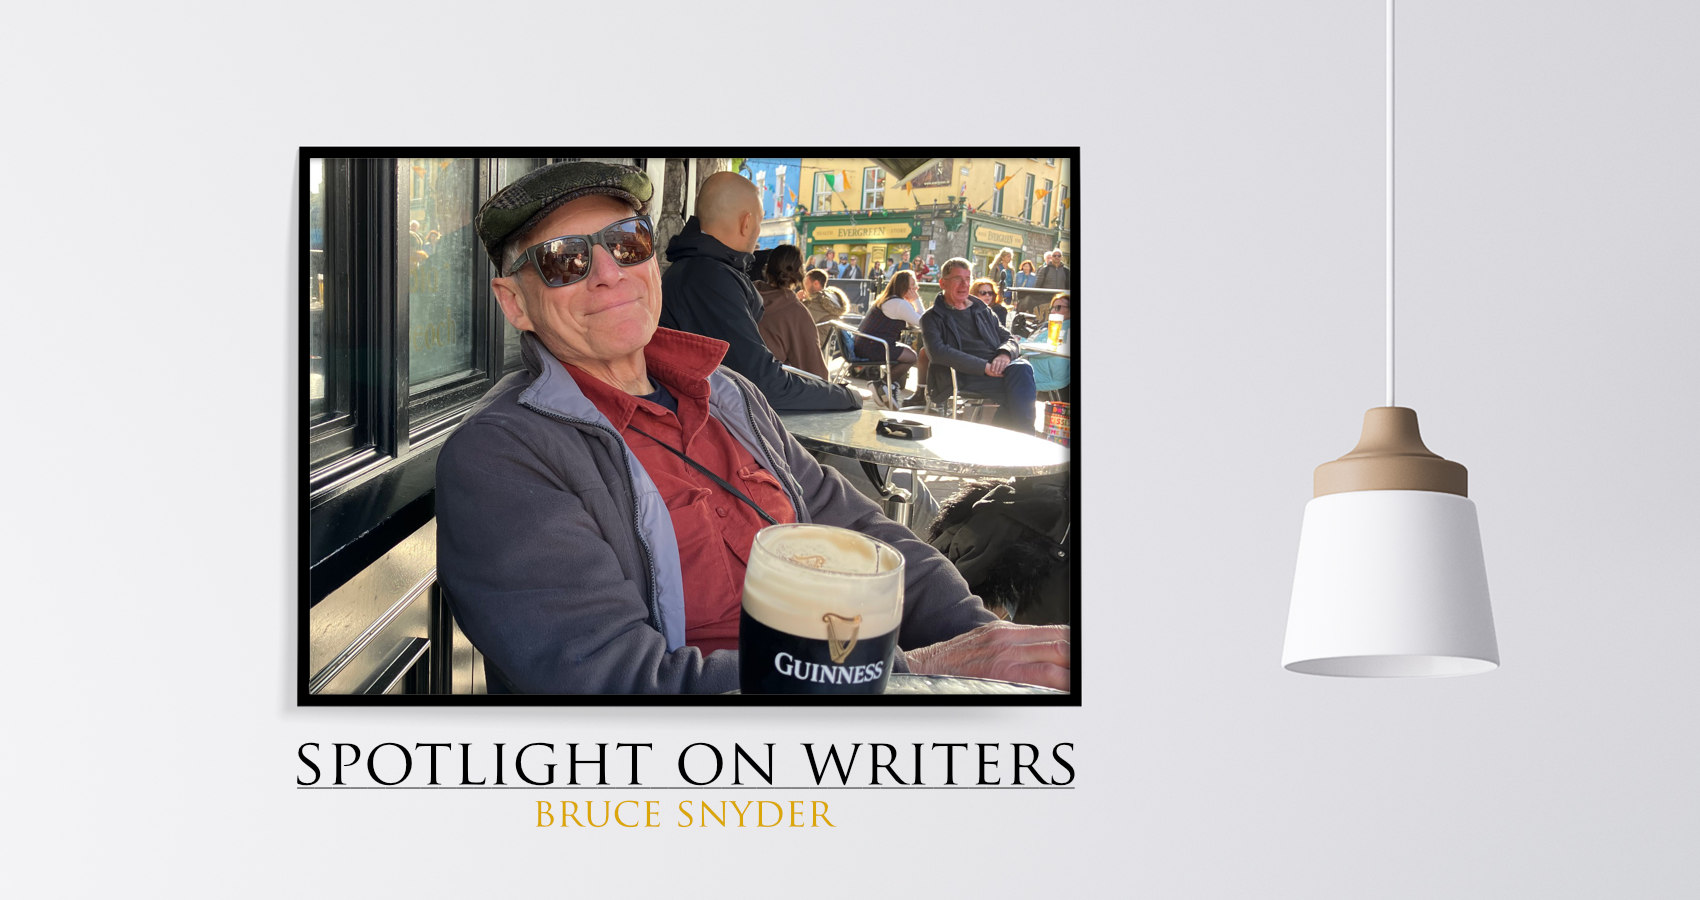 Spotlight On Writers - Bruce Snyder, interview at Spillwords.com